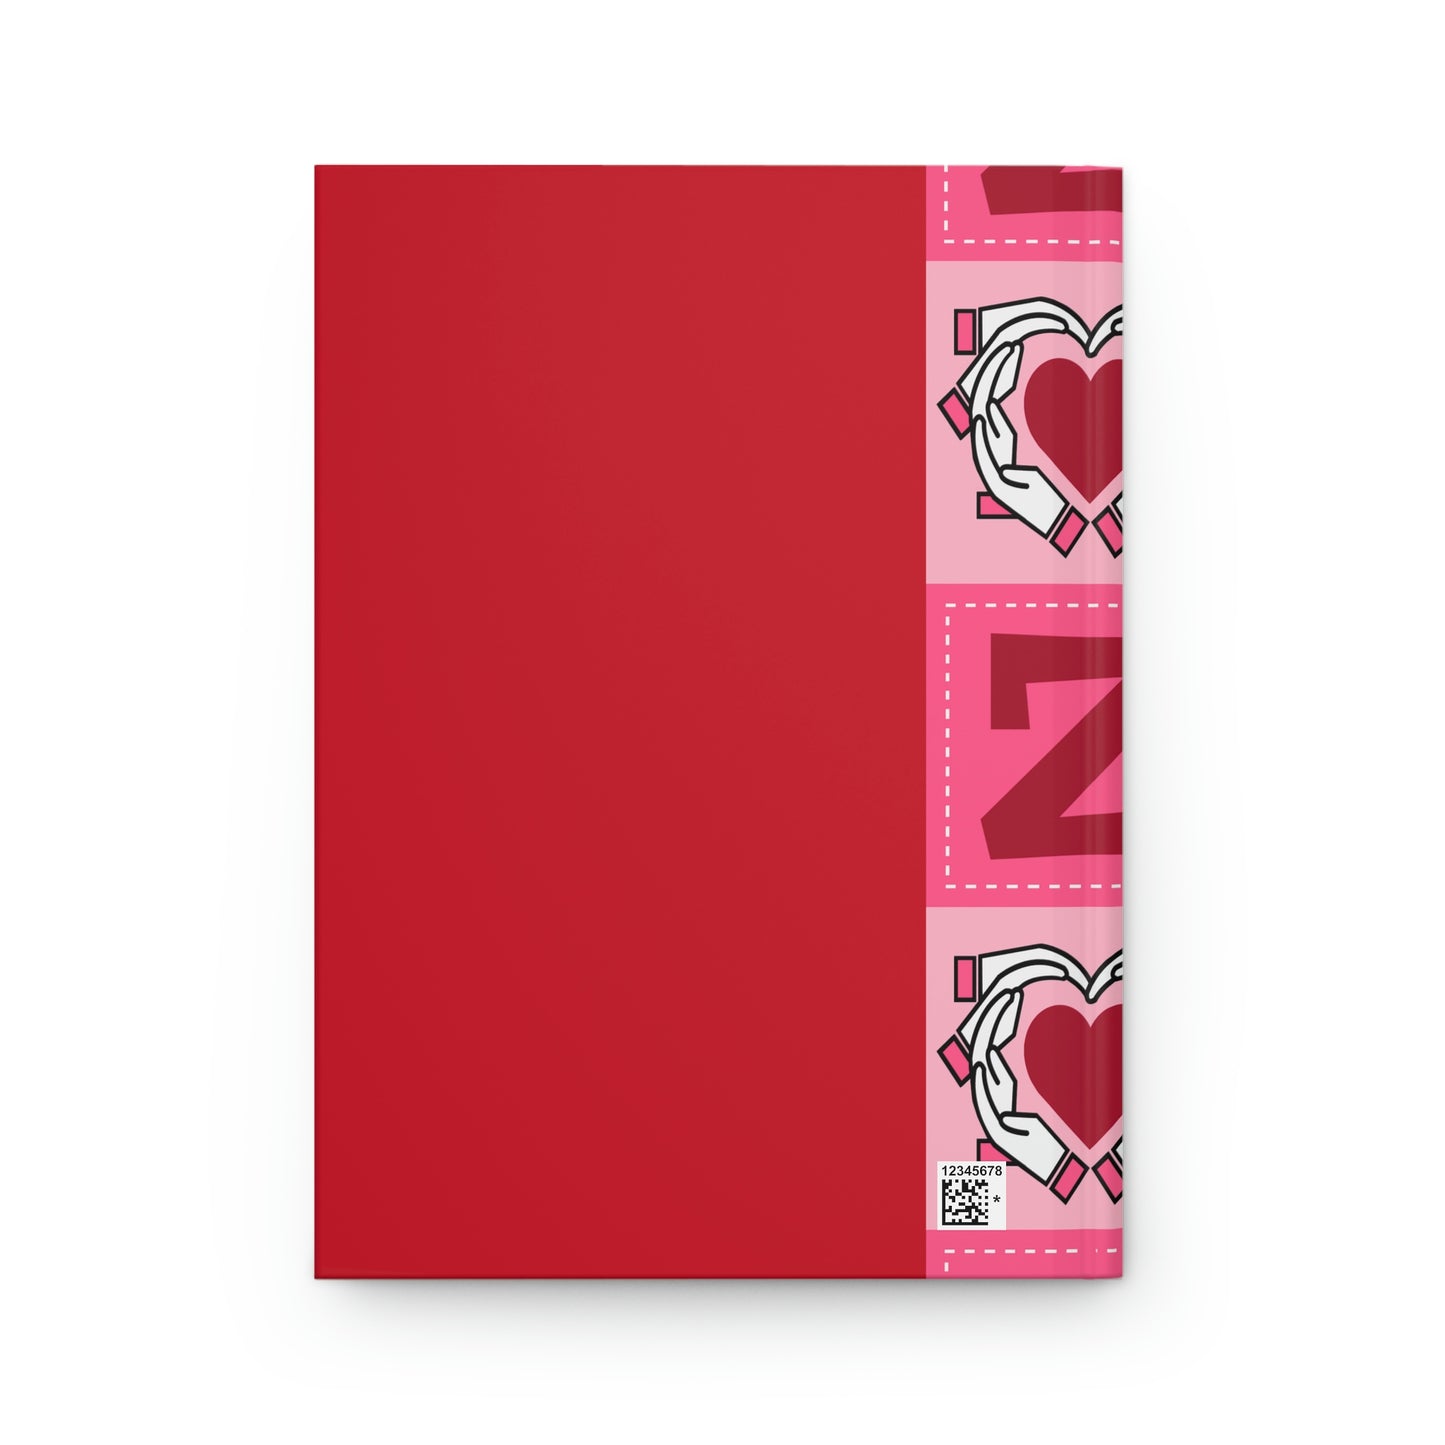 The Bible as Simple as ABC Z Hardcover Journal Matte